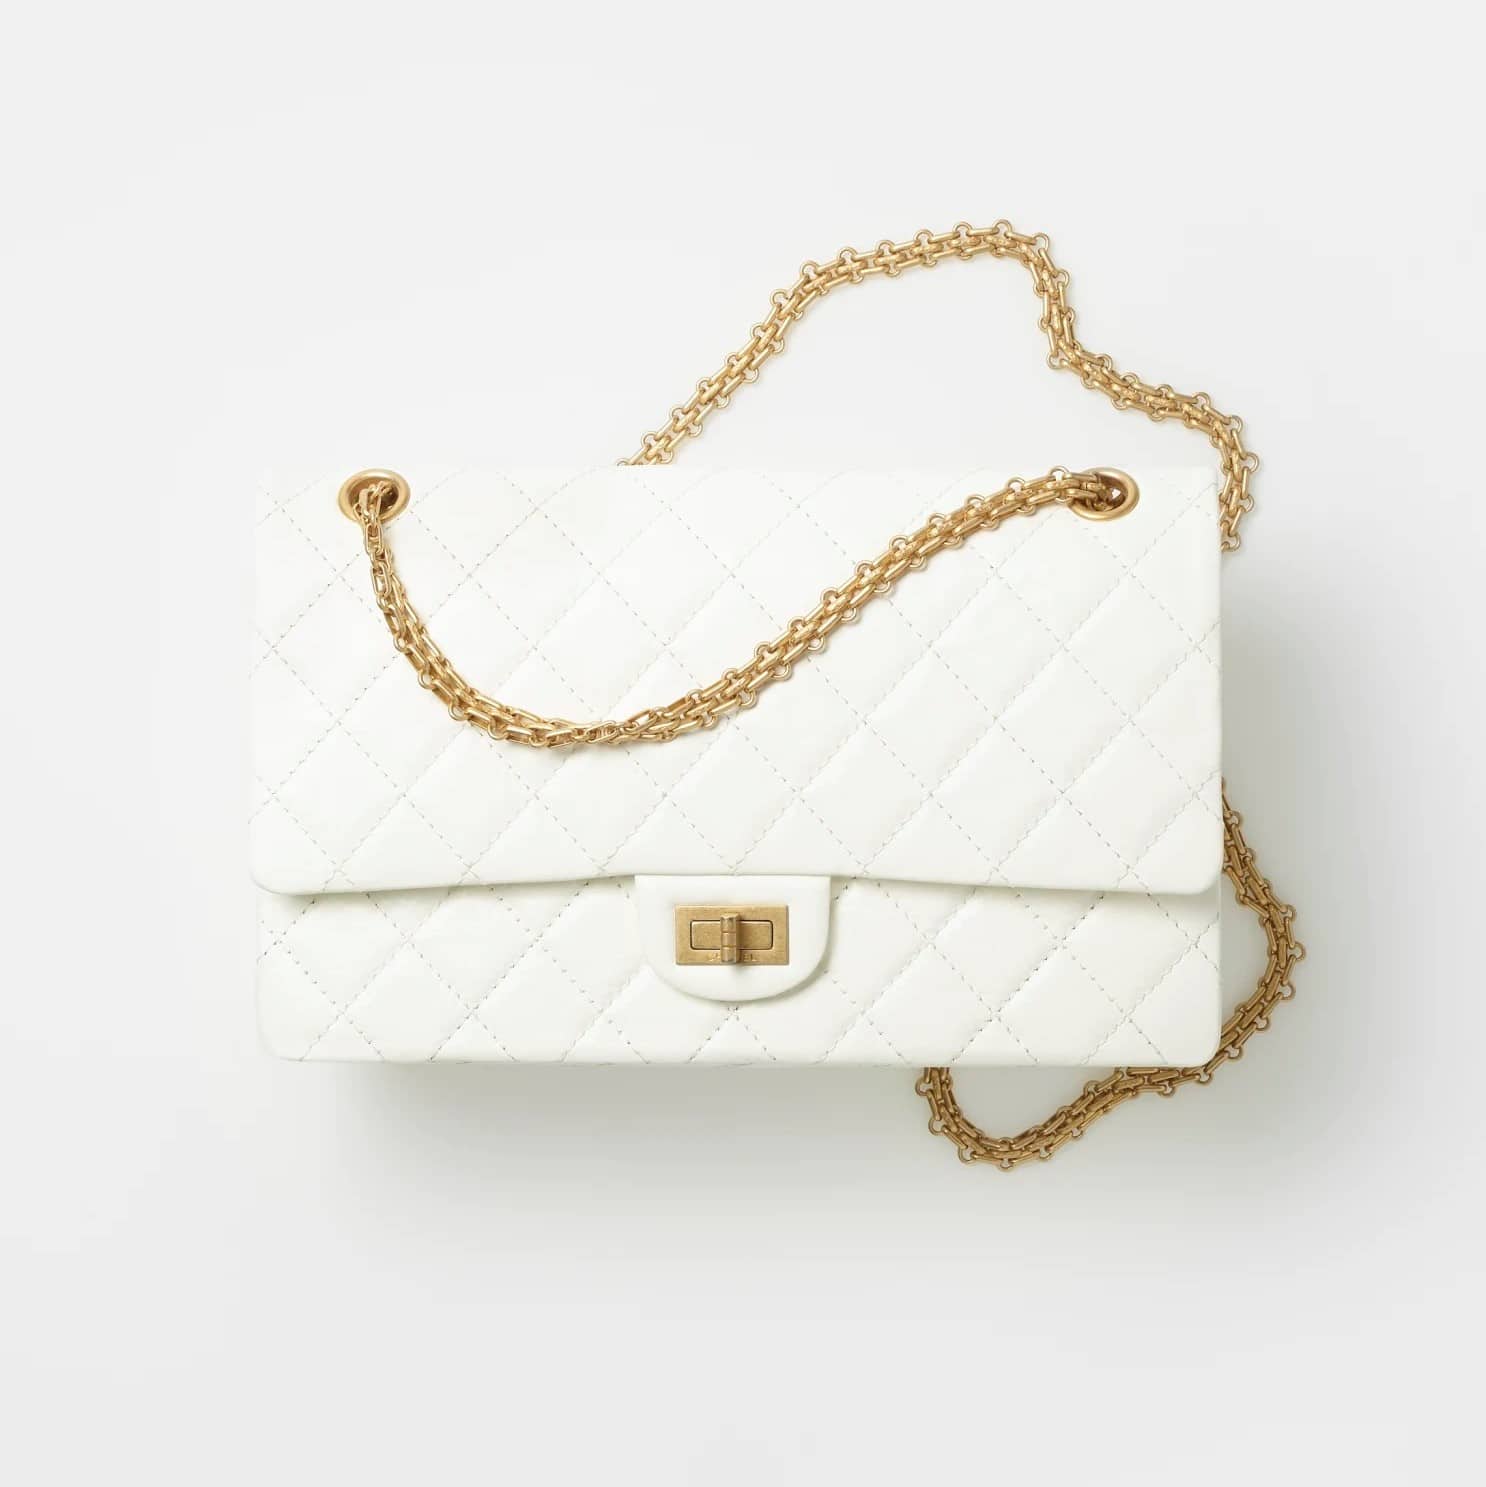 The Chanel Flap Bag Iconic Since 1955  Handbags  Accessories  Sothebys